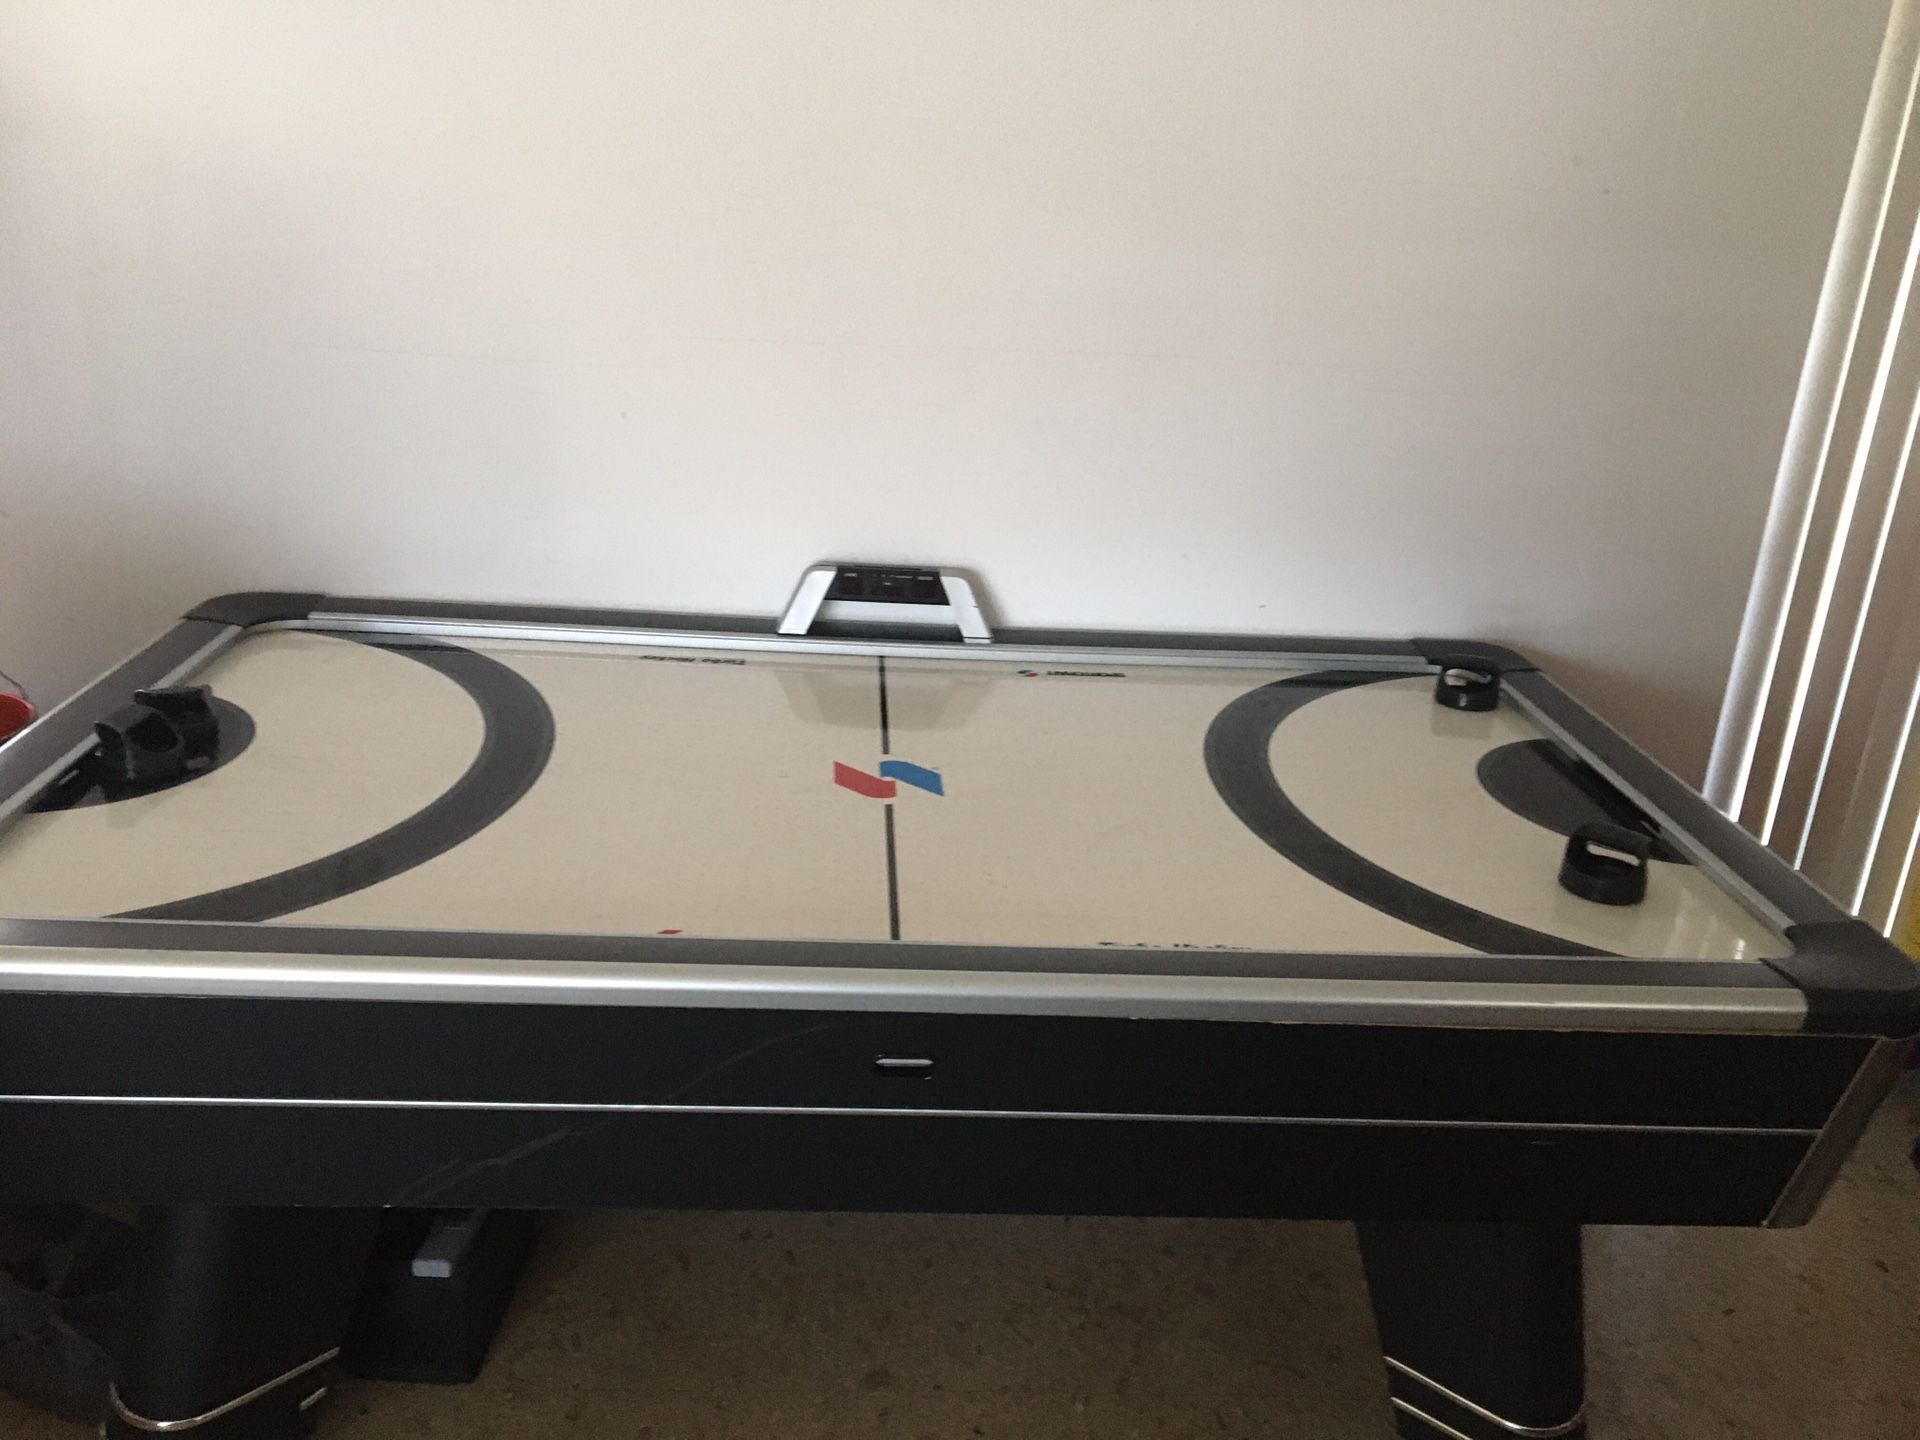 Air hockey table with minor scratch- MUST MOVE